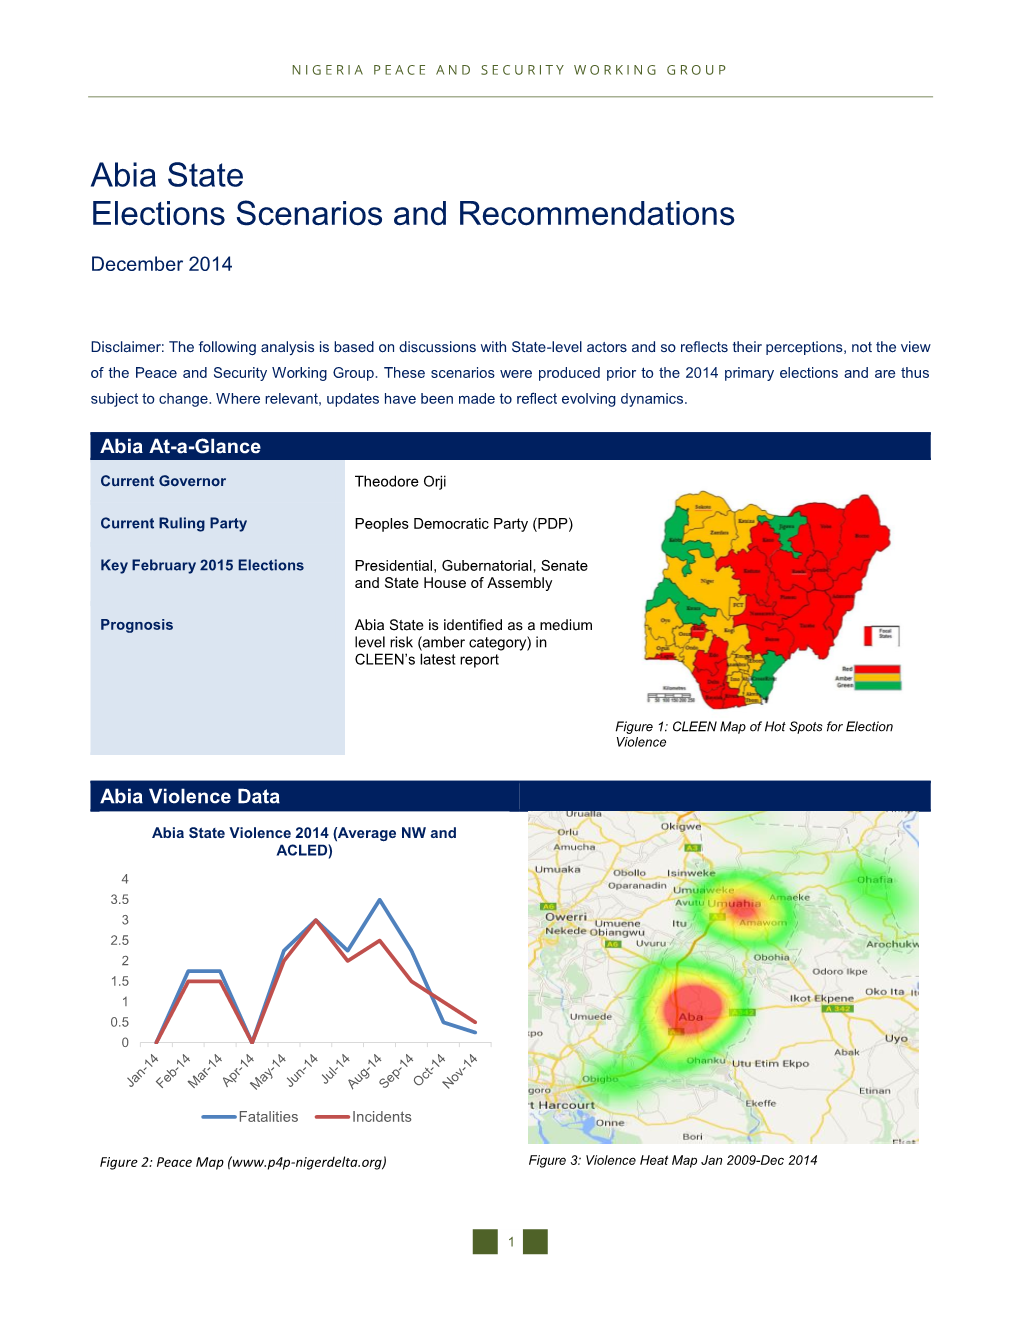 Abia State Elections Scenarios and Recommendations